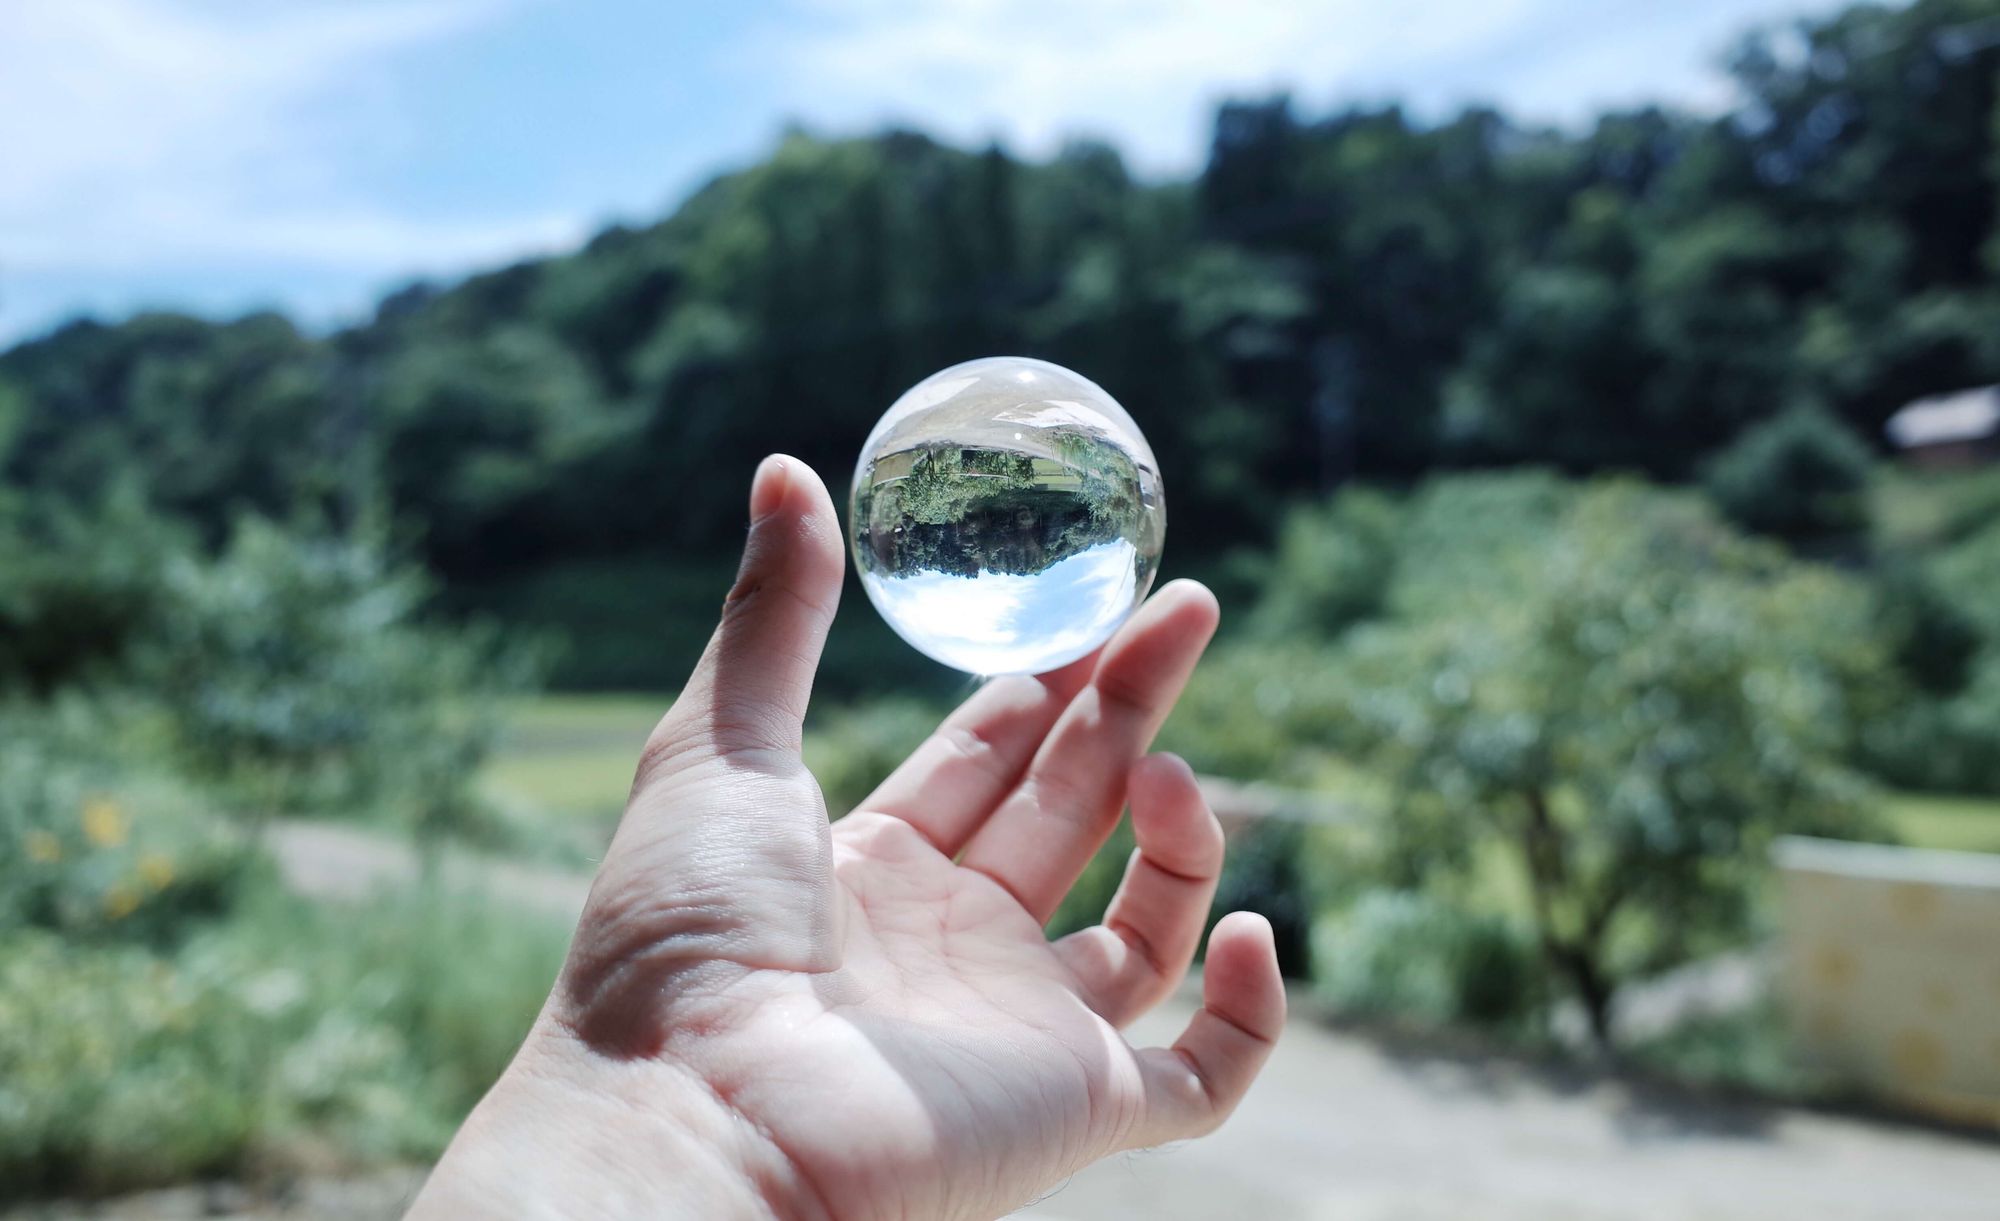 7 Social Media Predictions for 2023 (according to experts)